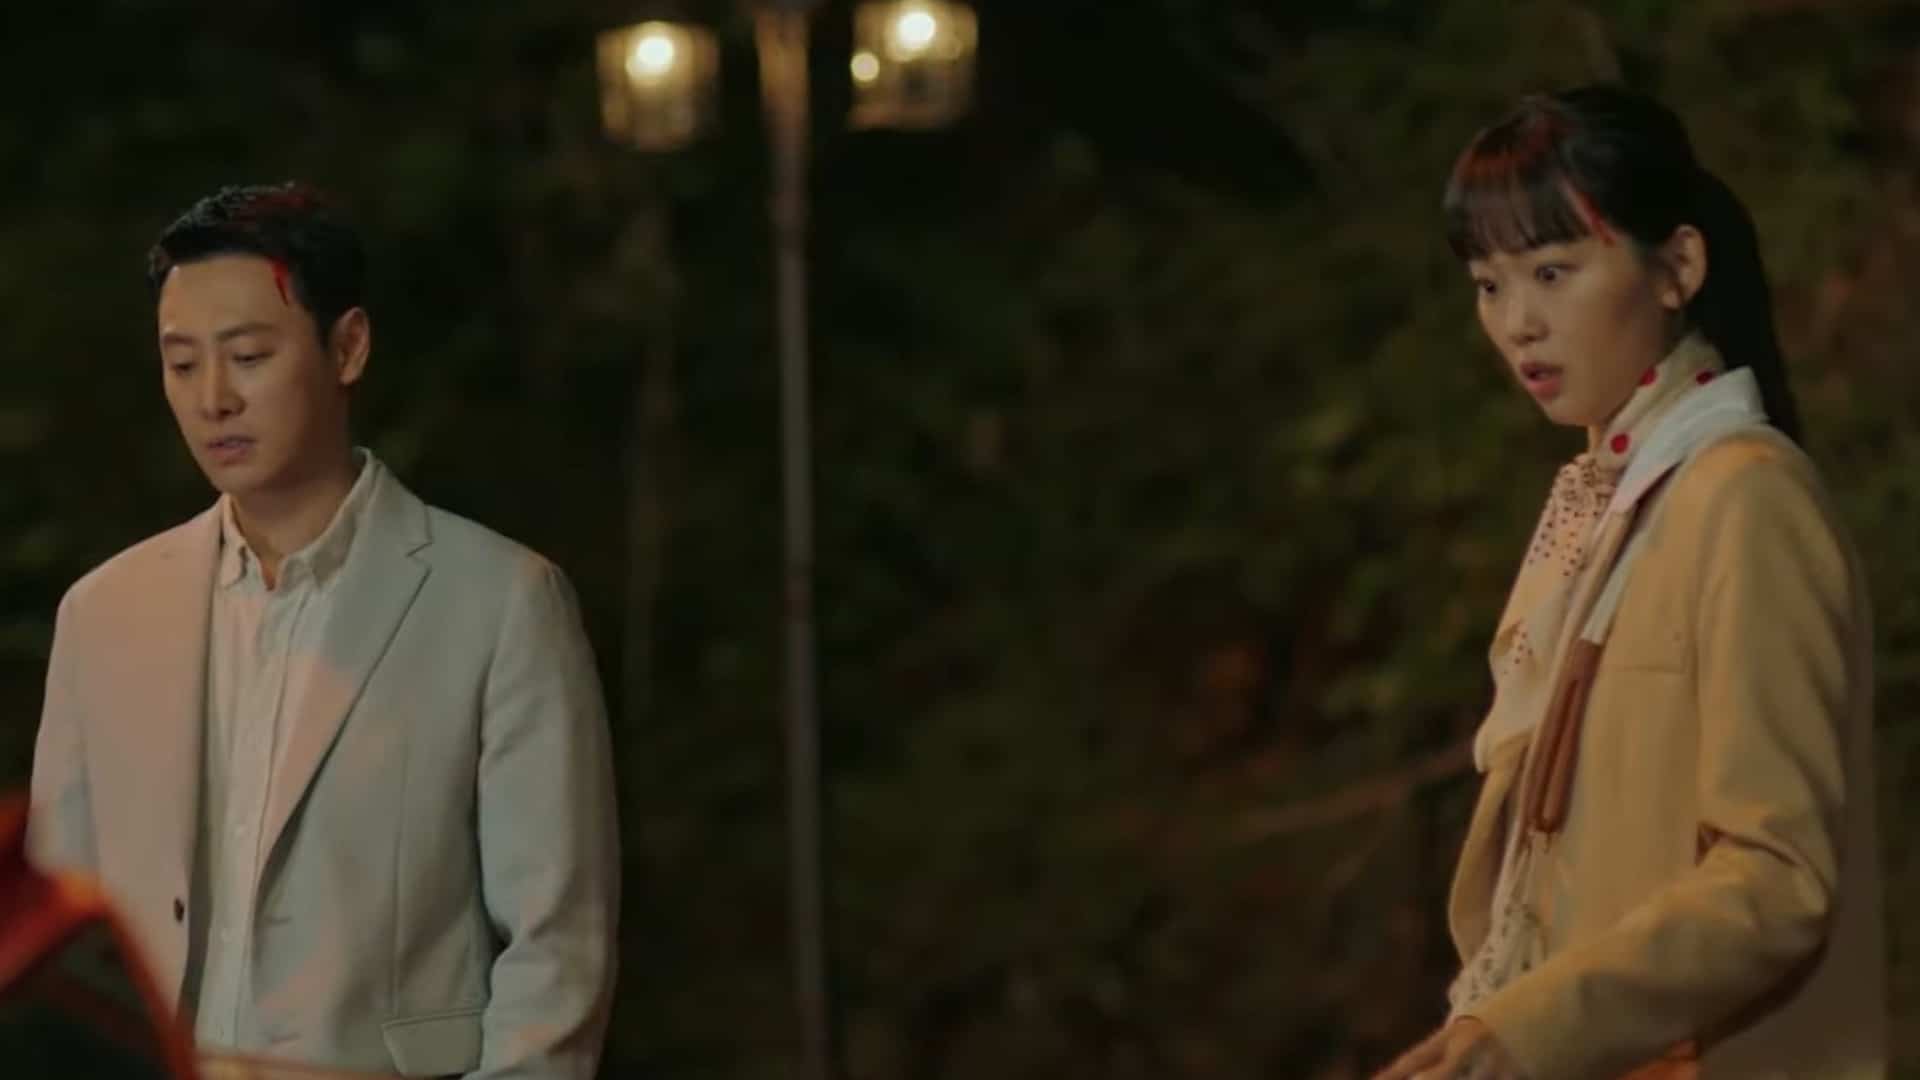 Run Into You: Hae Joon and Yoon Young